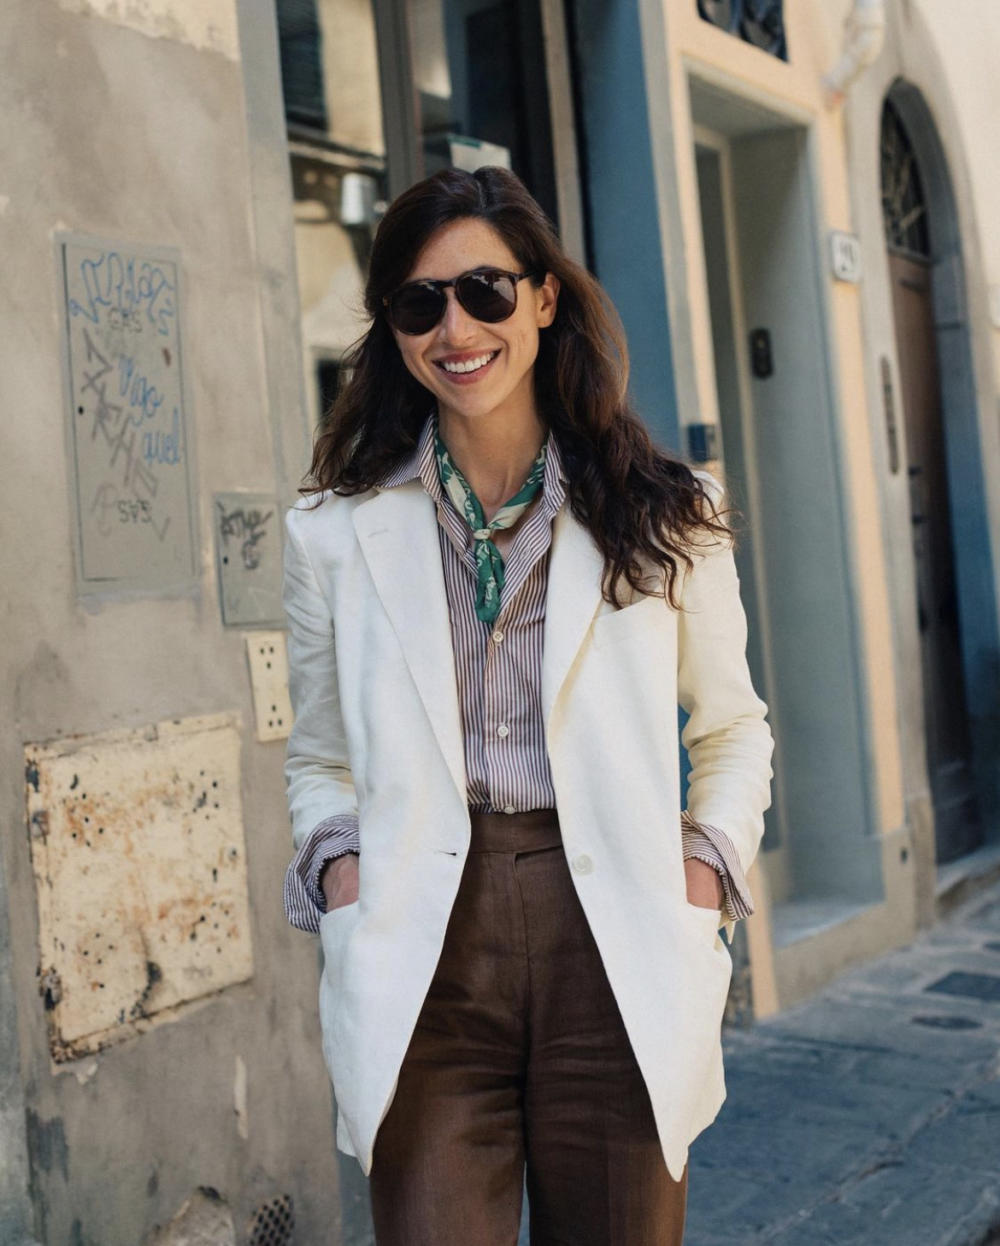 Day in, day out: On uniform dressing and travel – Permanent Style